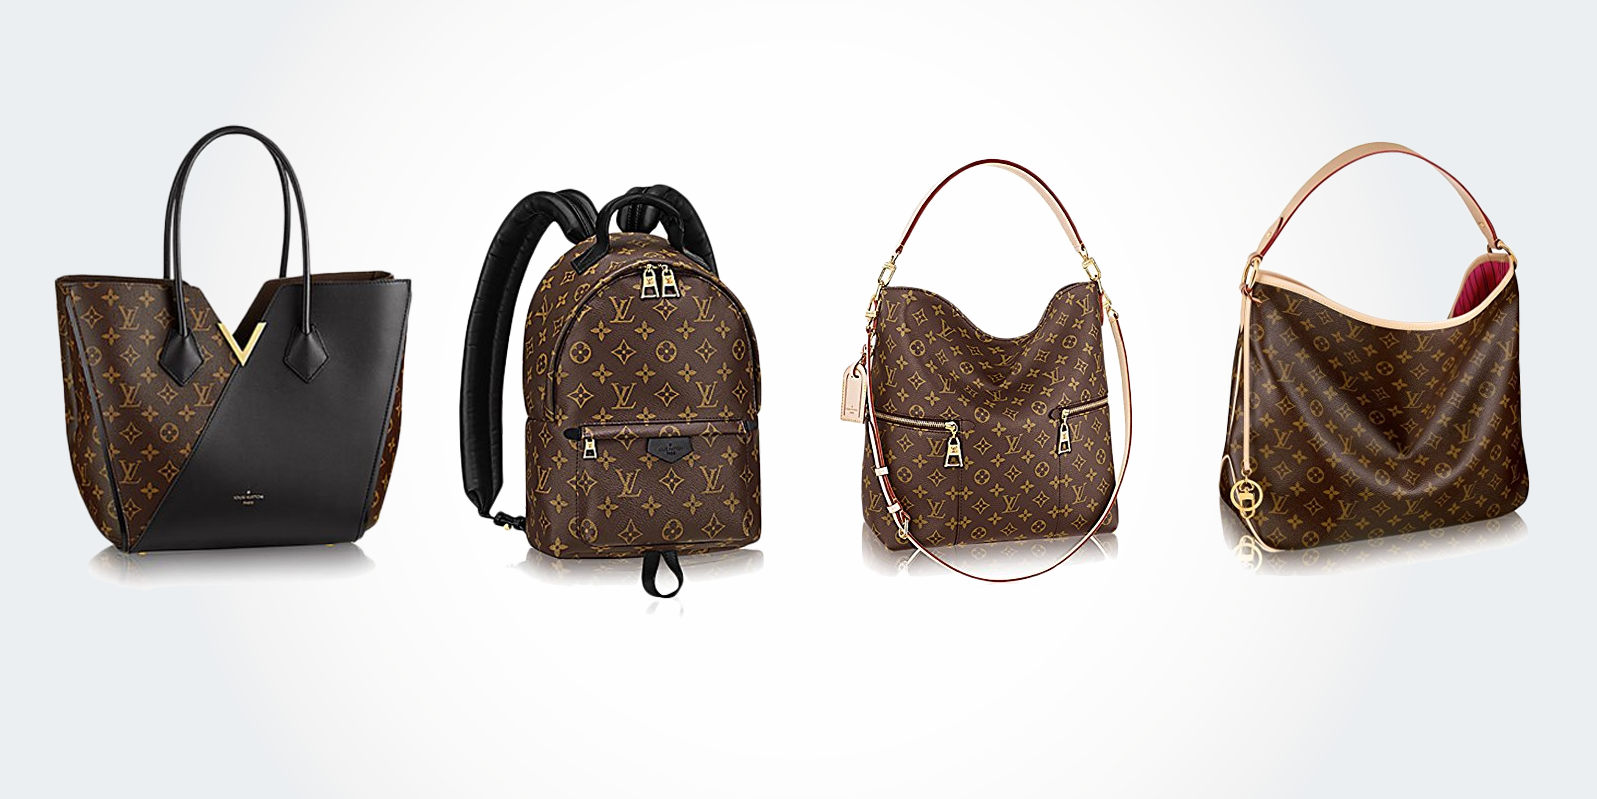 8 Best Louis Vuitton Bag & Handbags for Everyday Use